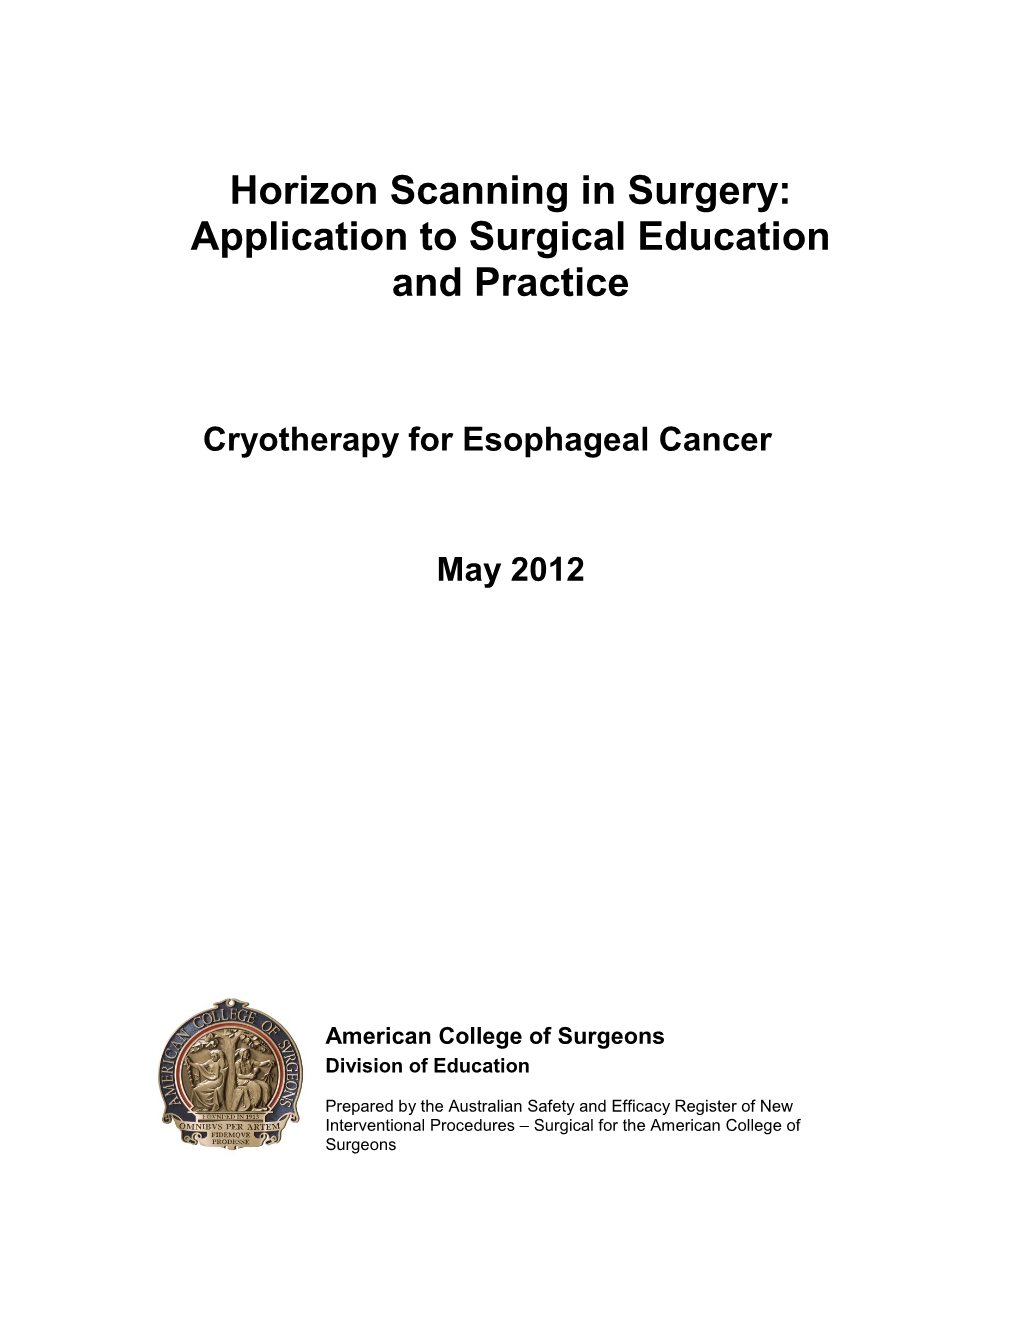 Cryotherapy for Esophageal Cancer May 2012